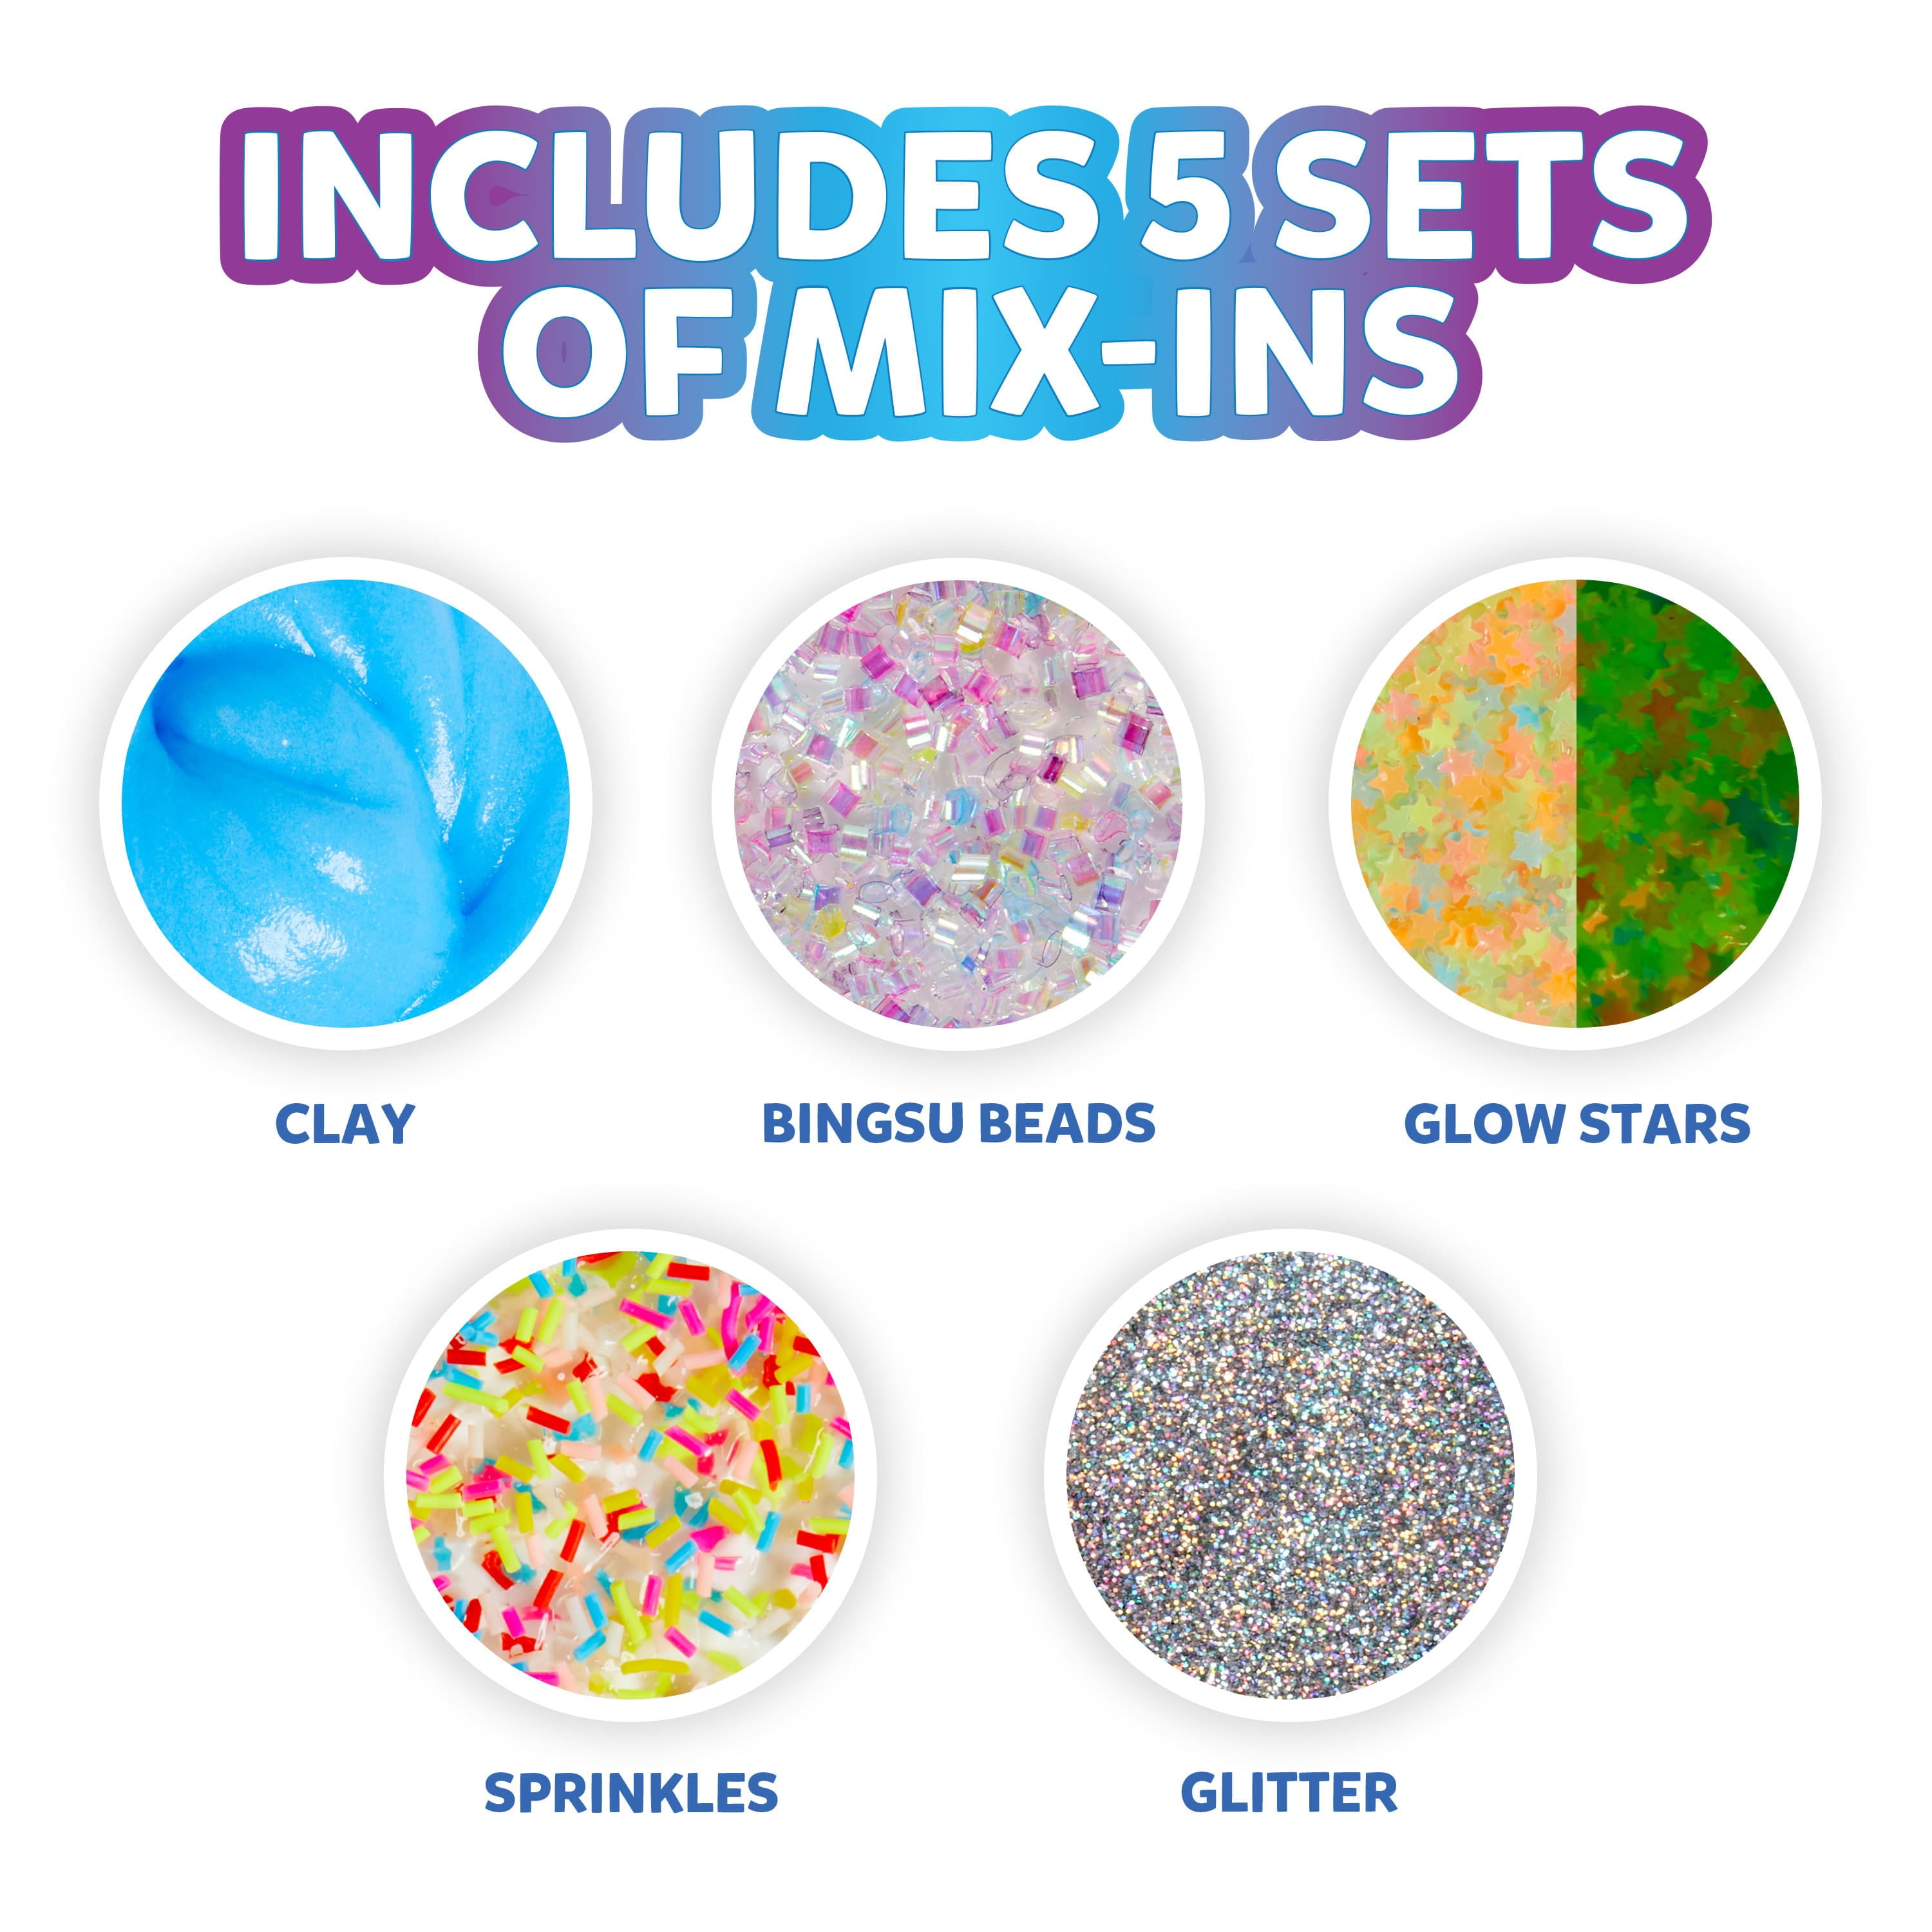 Elmer's Gue 3lb Glassy Clear Deluxe Premade Slime Kit With Mix-ins, slimes  